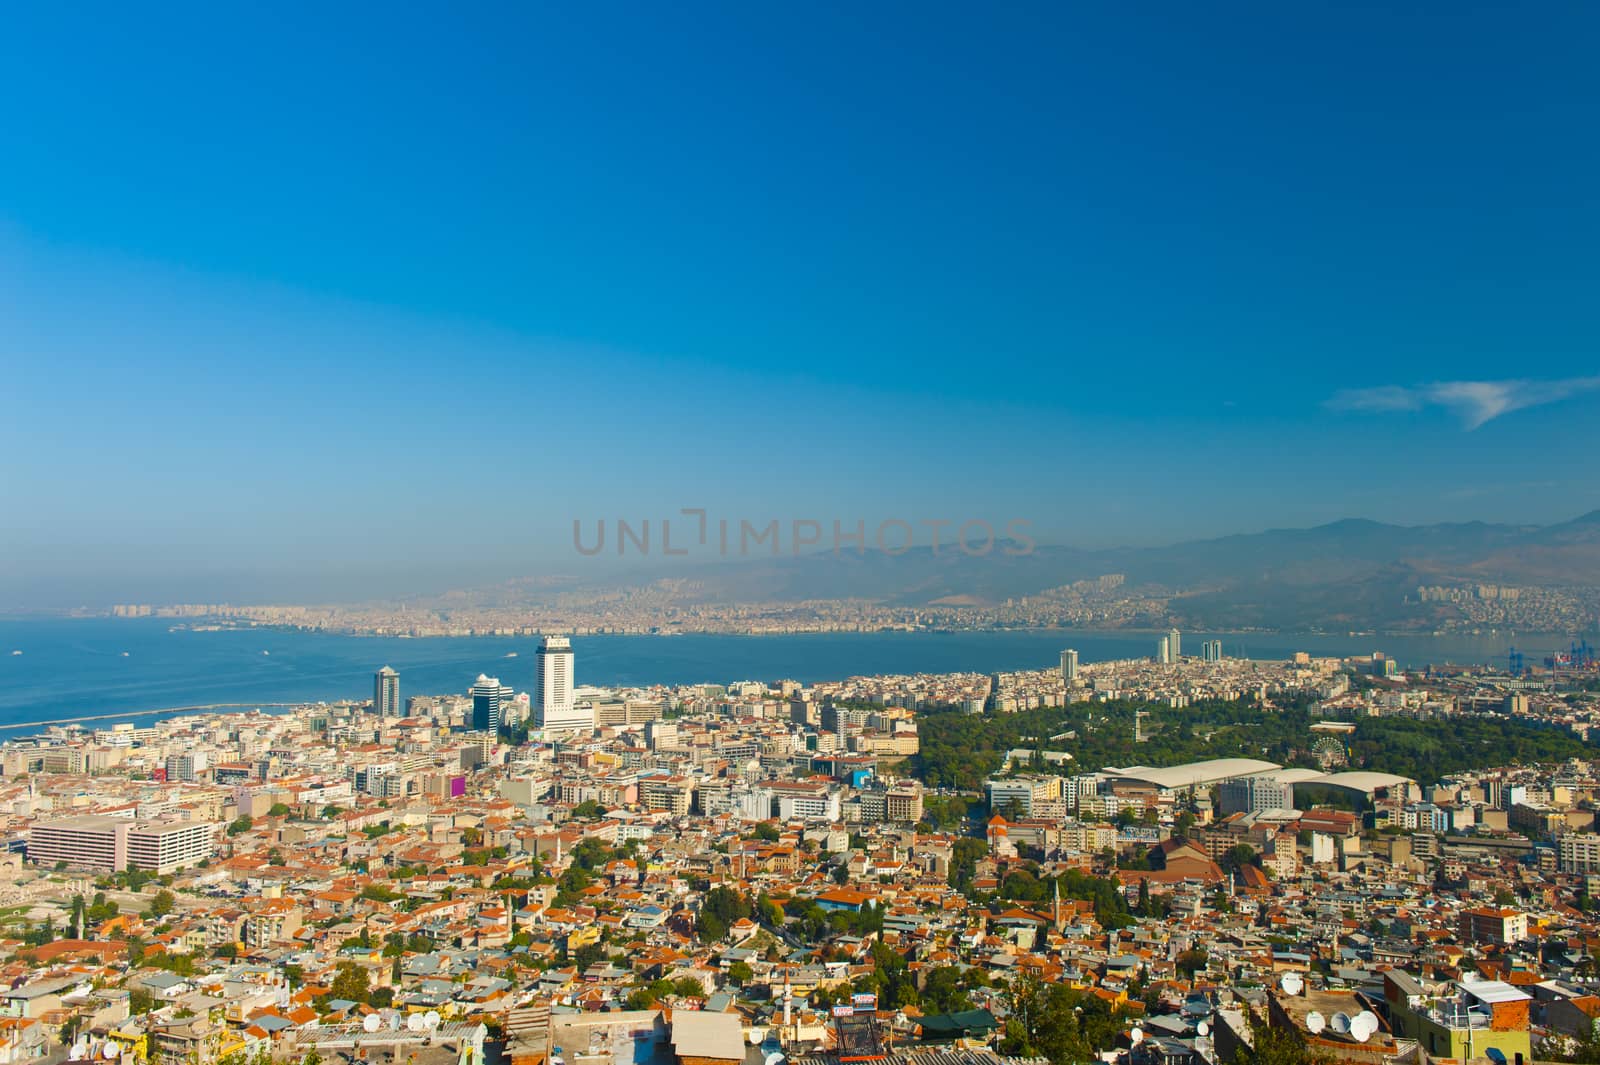 City of Izmir seen from the hill above, Turkey